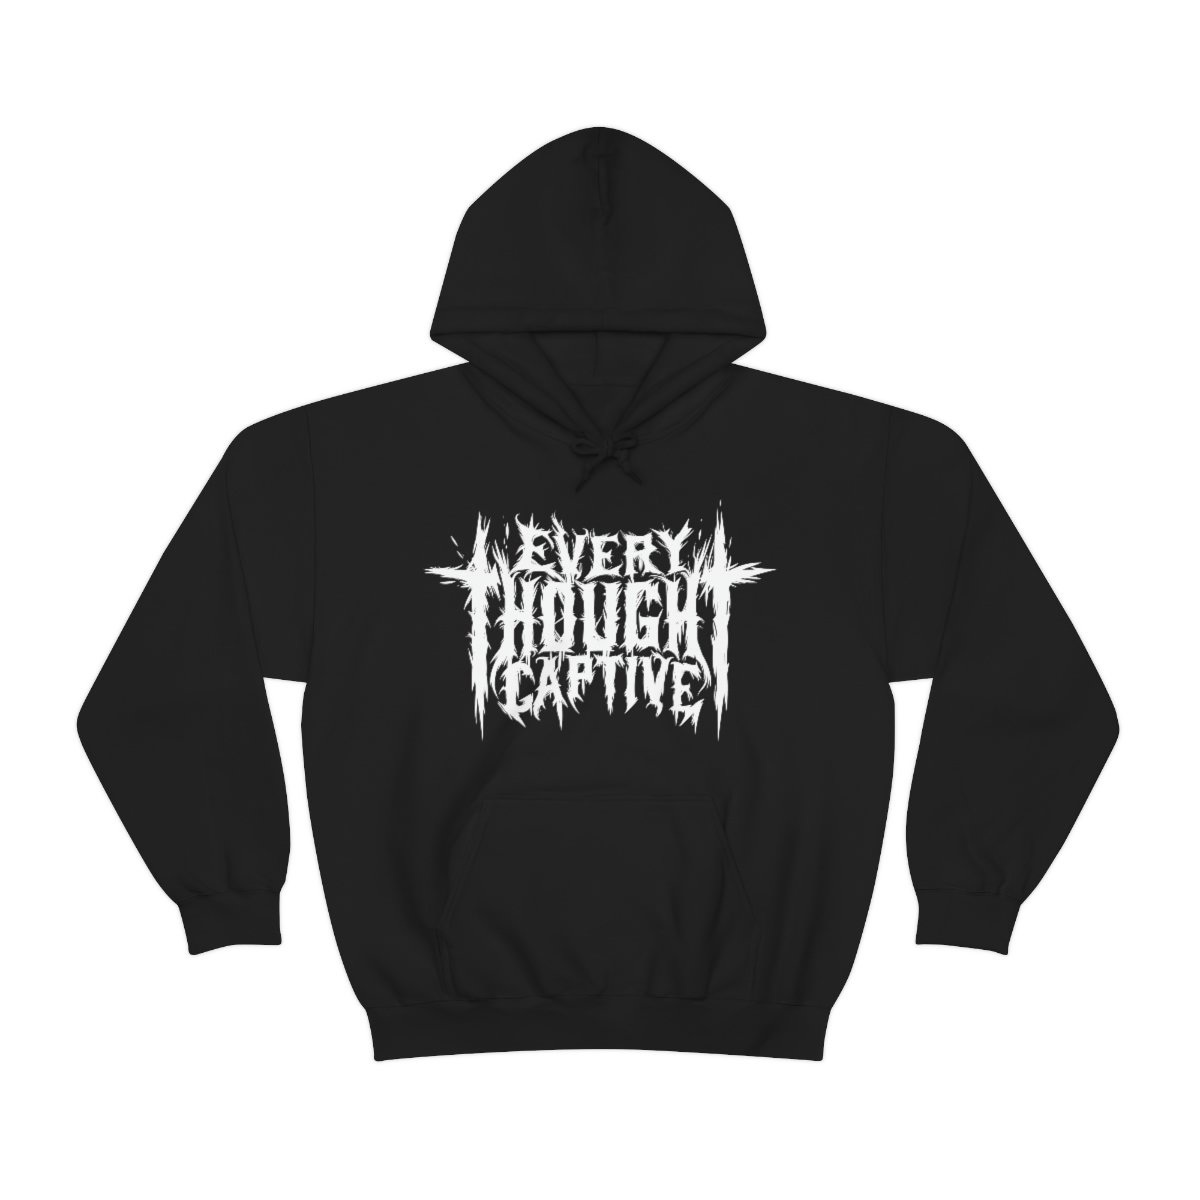 Every Thought Captive Pullover Hooded Sweatshirt